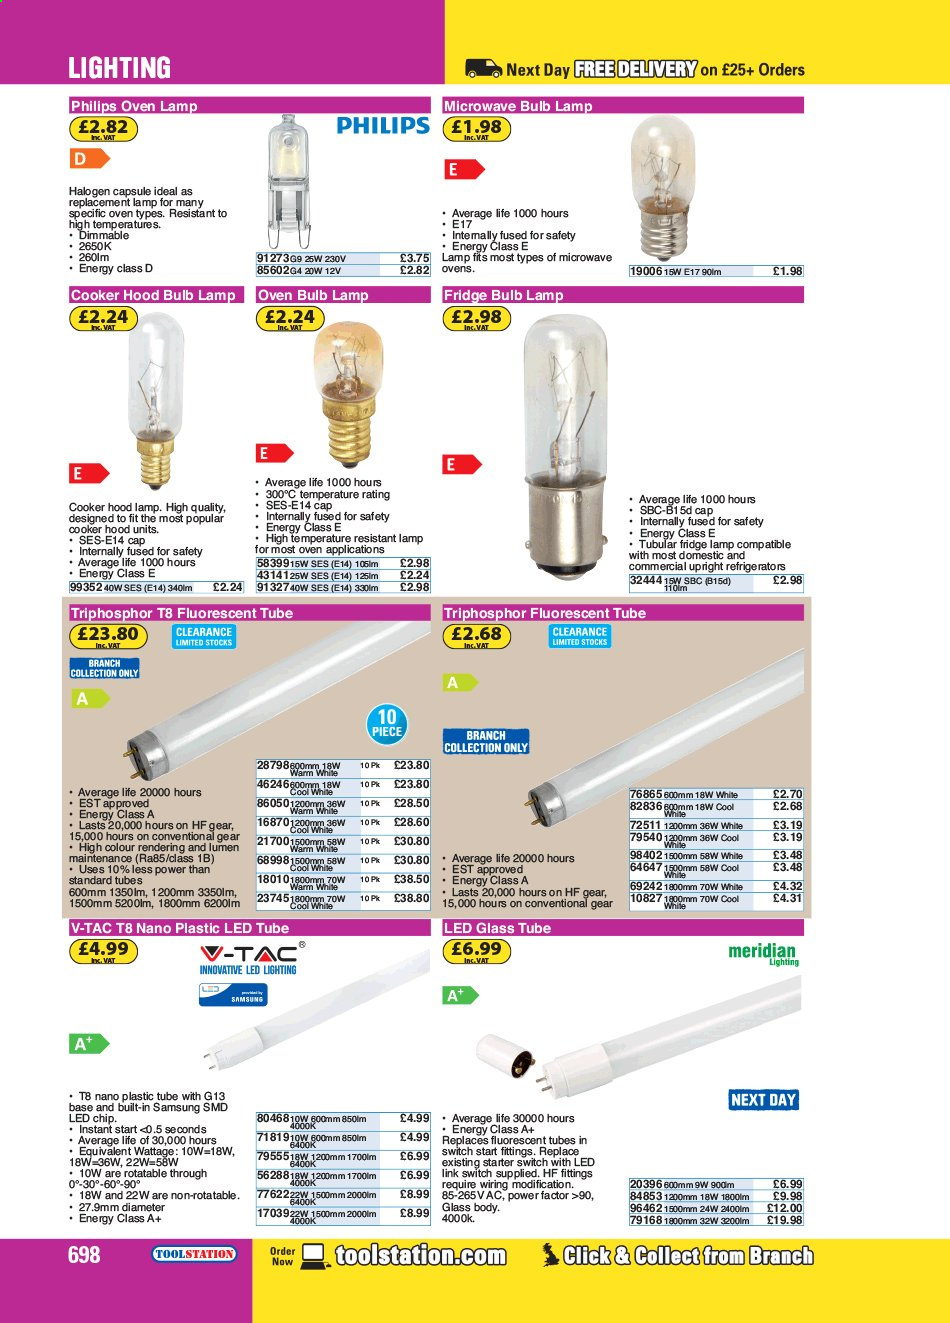 Toolstation offer . Page 698.